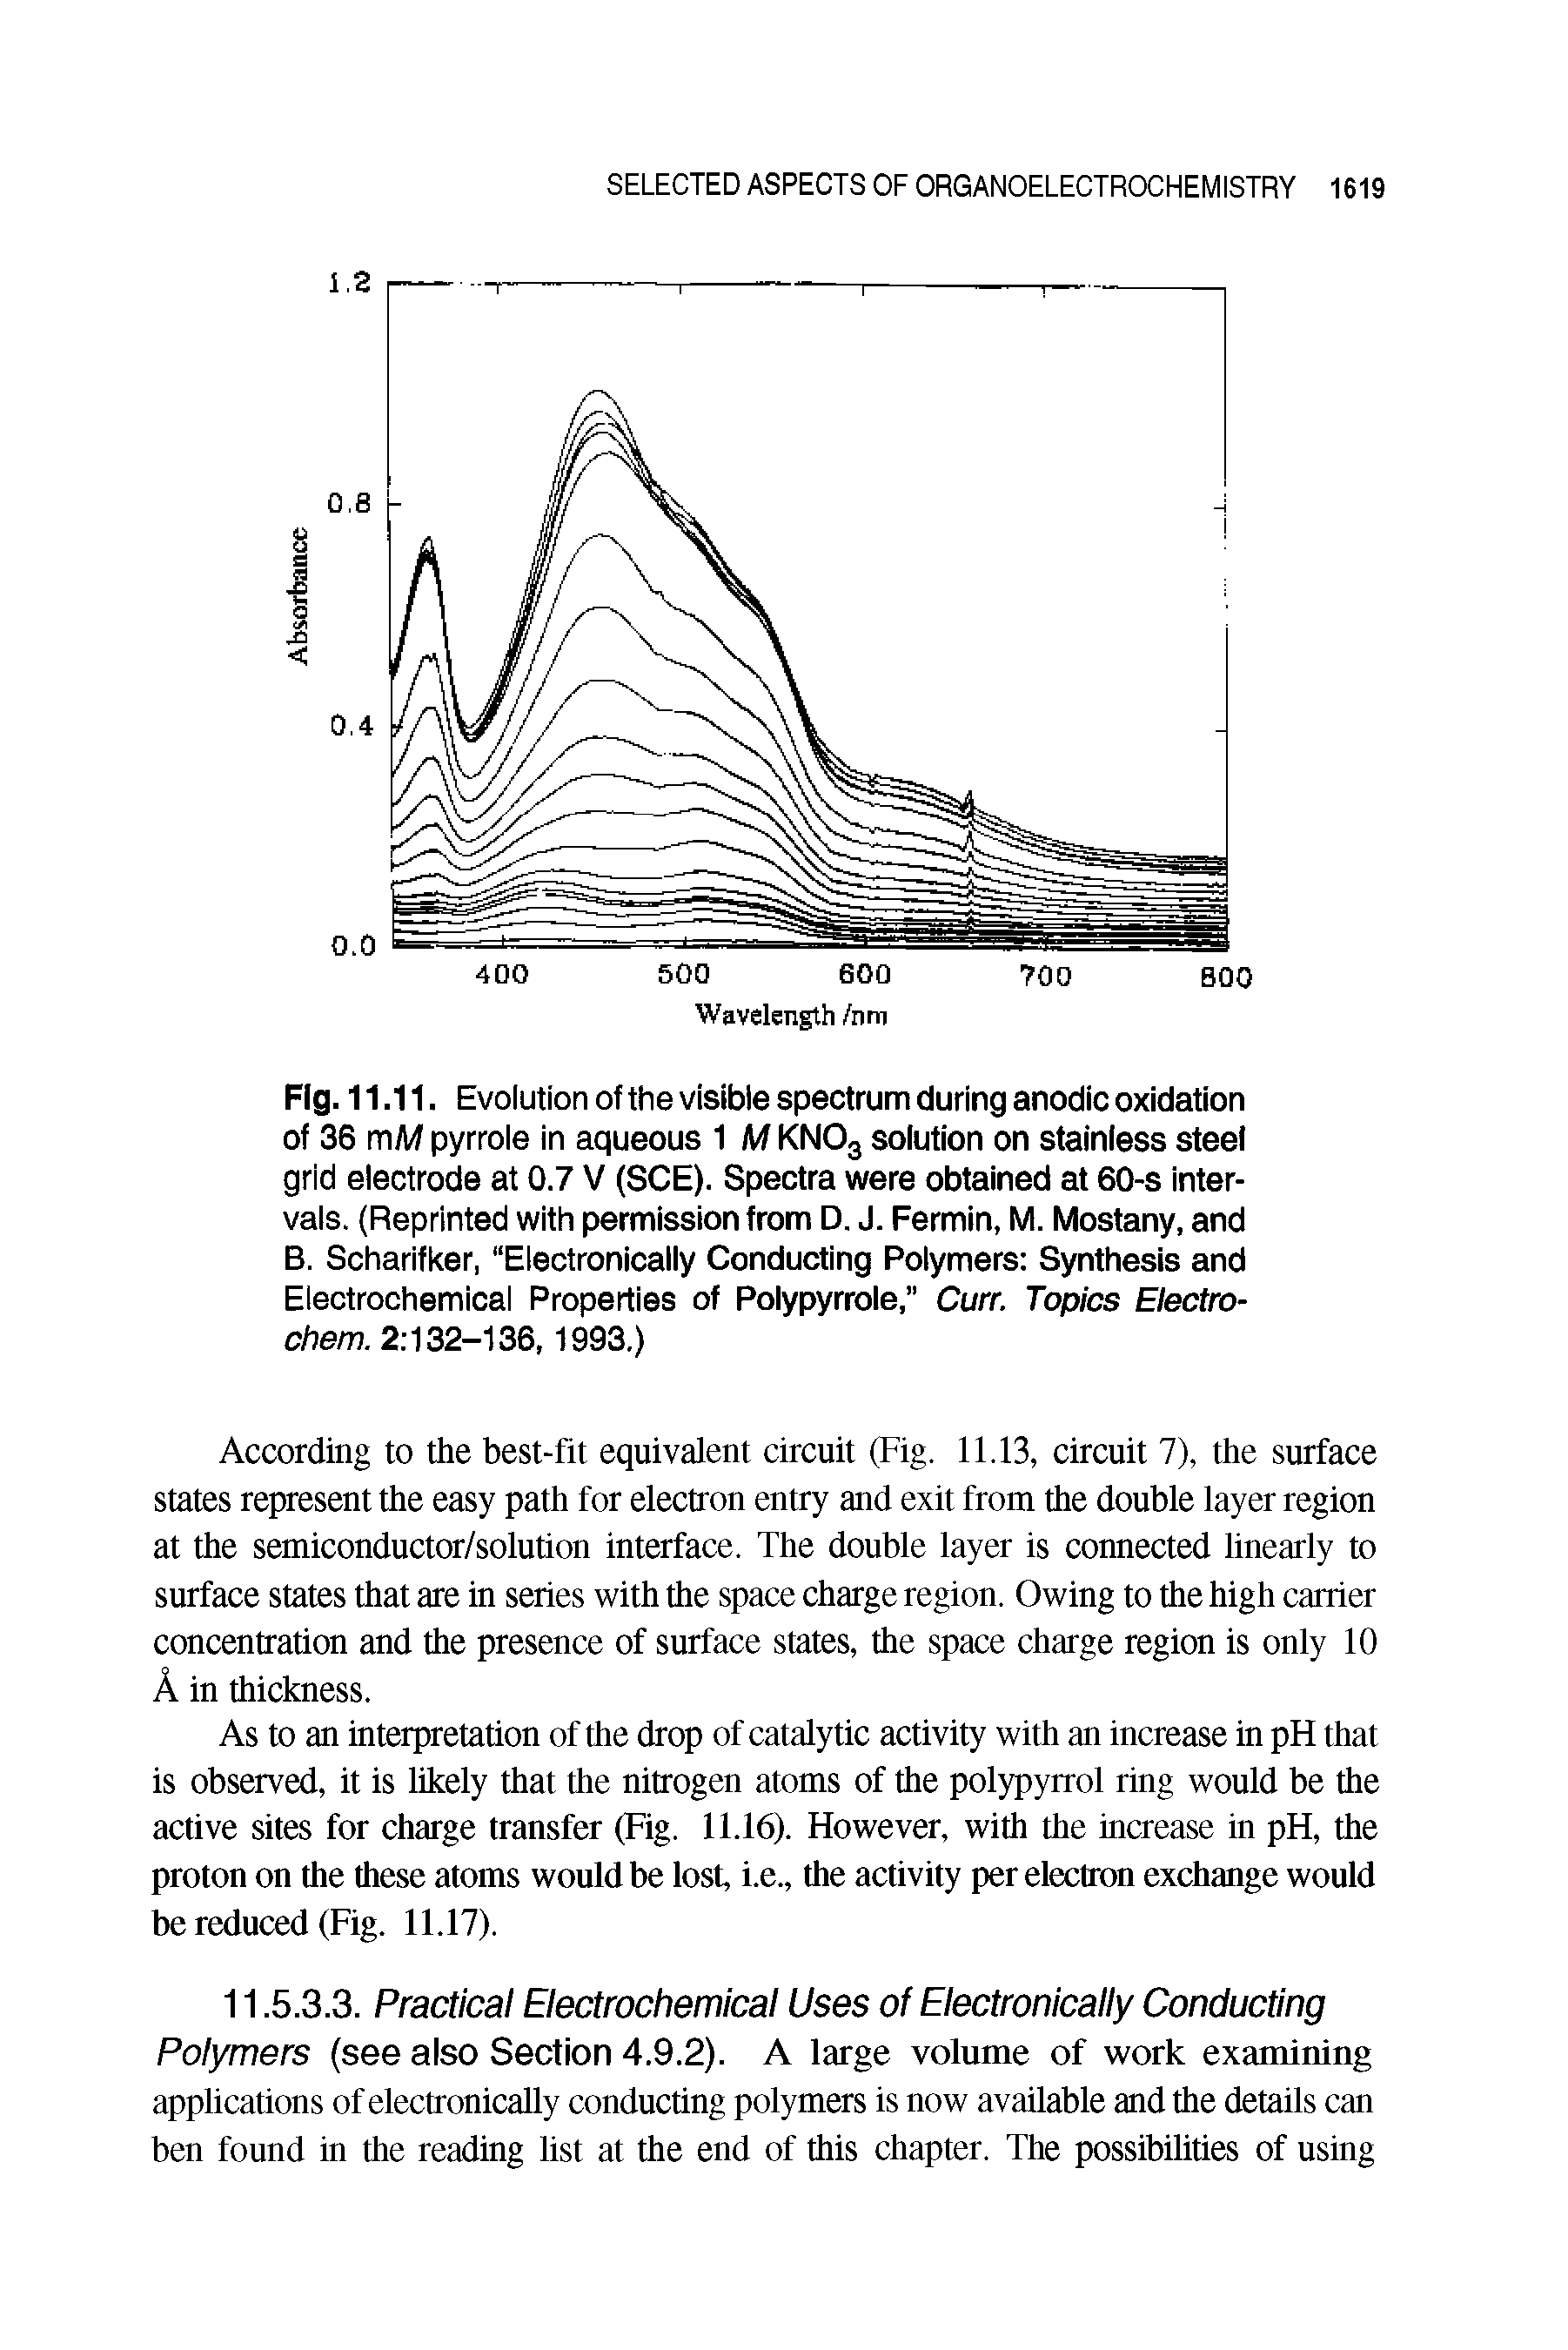 Fig. 11.11. Evolution of the visible spectrum during anodic oxidation of 36 mM pyrrole in aqueous 1 M KN03 solution on stainless steel grid electrode at 0.7 V (SCE). Spectra were obtained at 60-s intervals. (Reprinted with permission from D. J. Fermin, M. Mostany, and B. Scharifker, Electronically Conducting Polymers Synthesis and Electrochemical Properties of Polypyrrole, Curr. Topics Electro-chem. 2 132-136,1993.)...